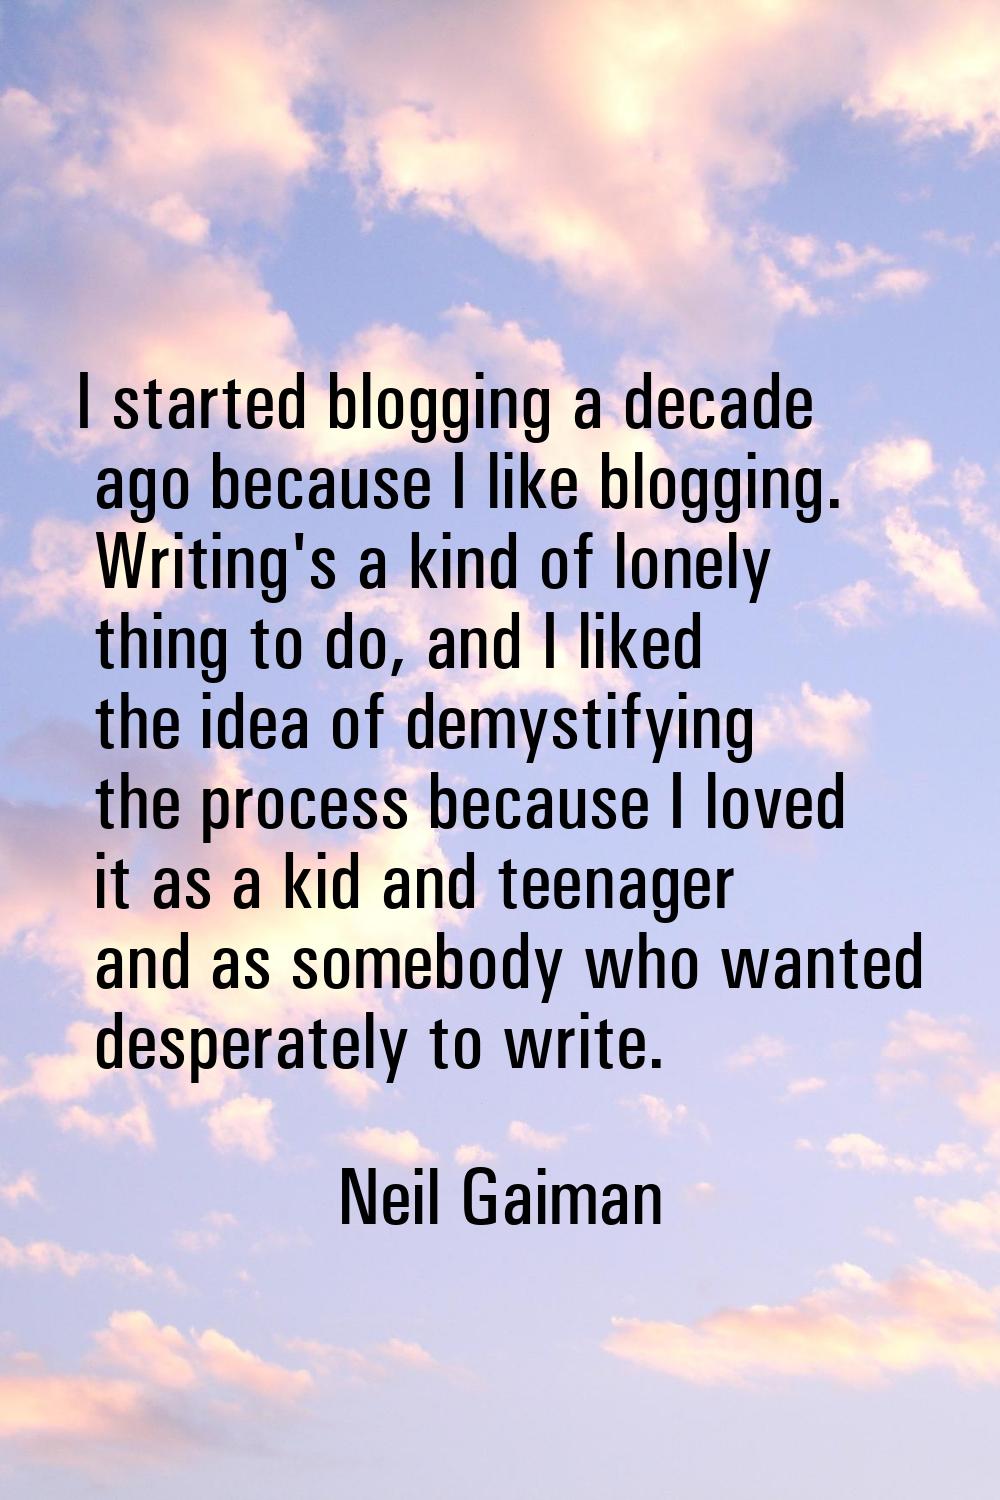 I started blogging a decade ago because I like blogging. Writing's a kind of lonely thing to do, an